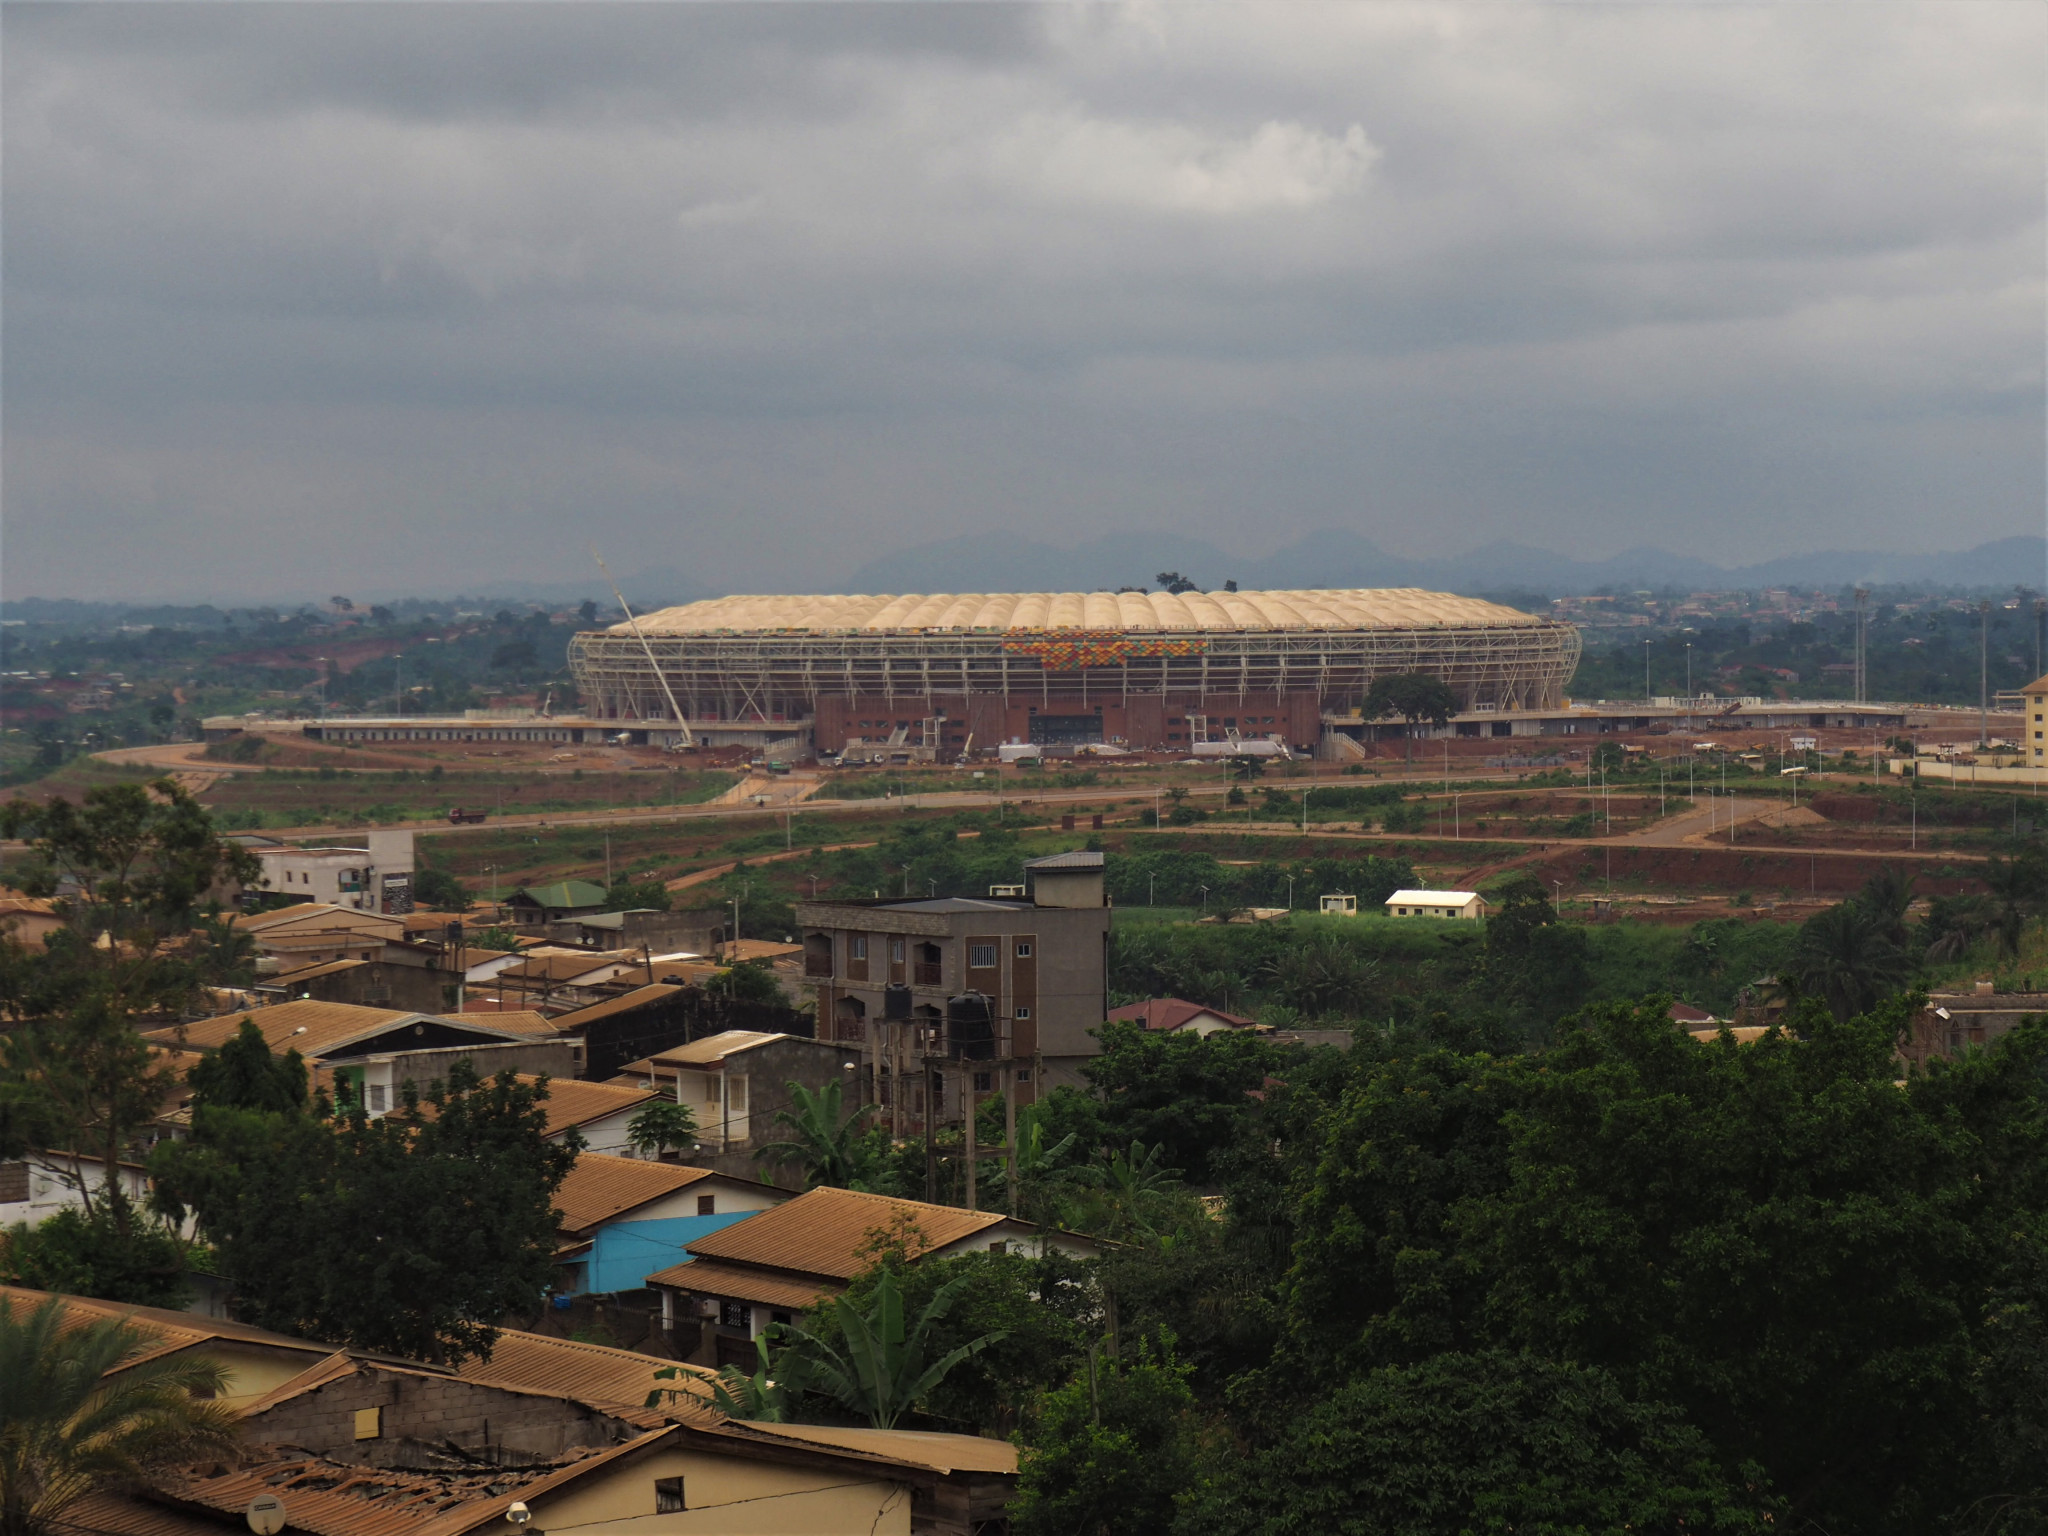 The opening match and final of the upcoming Africa Cup of Nations is set to take place in Yaoundé's Olembe Stadium ©Getty Images